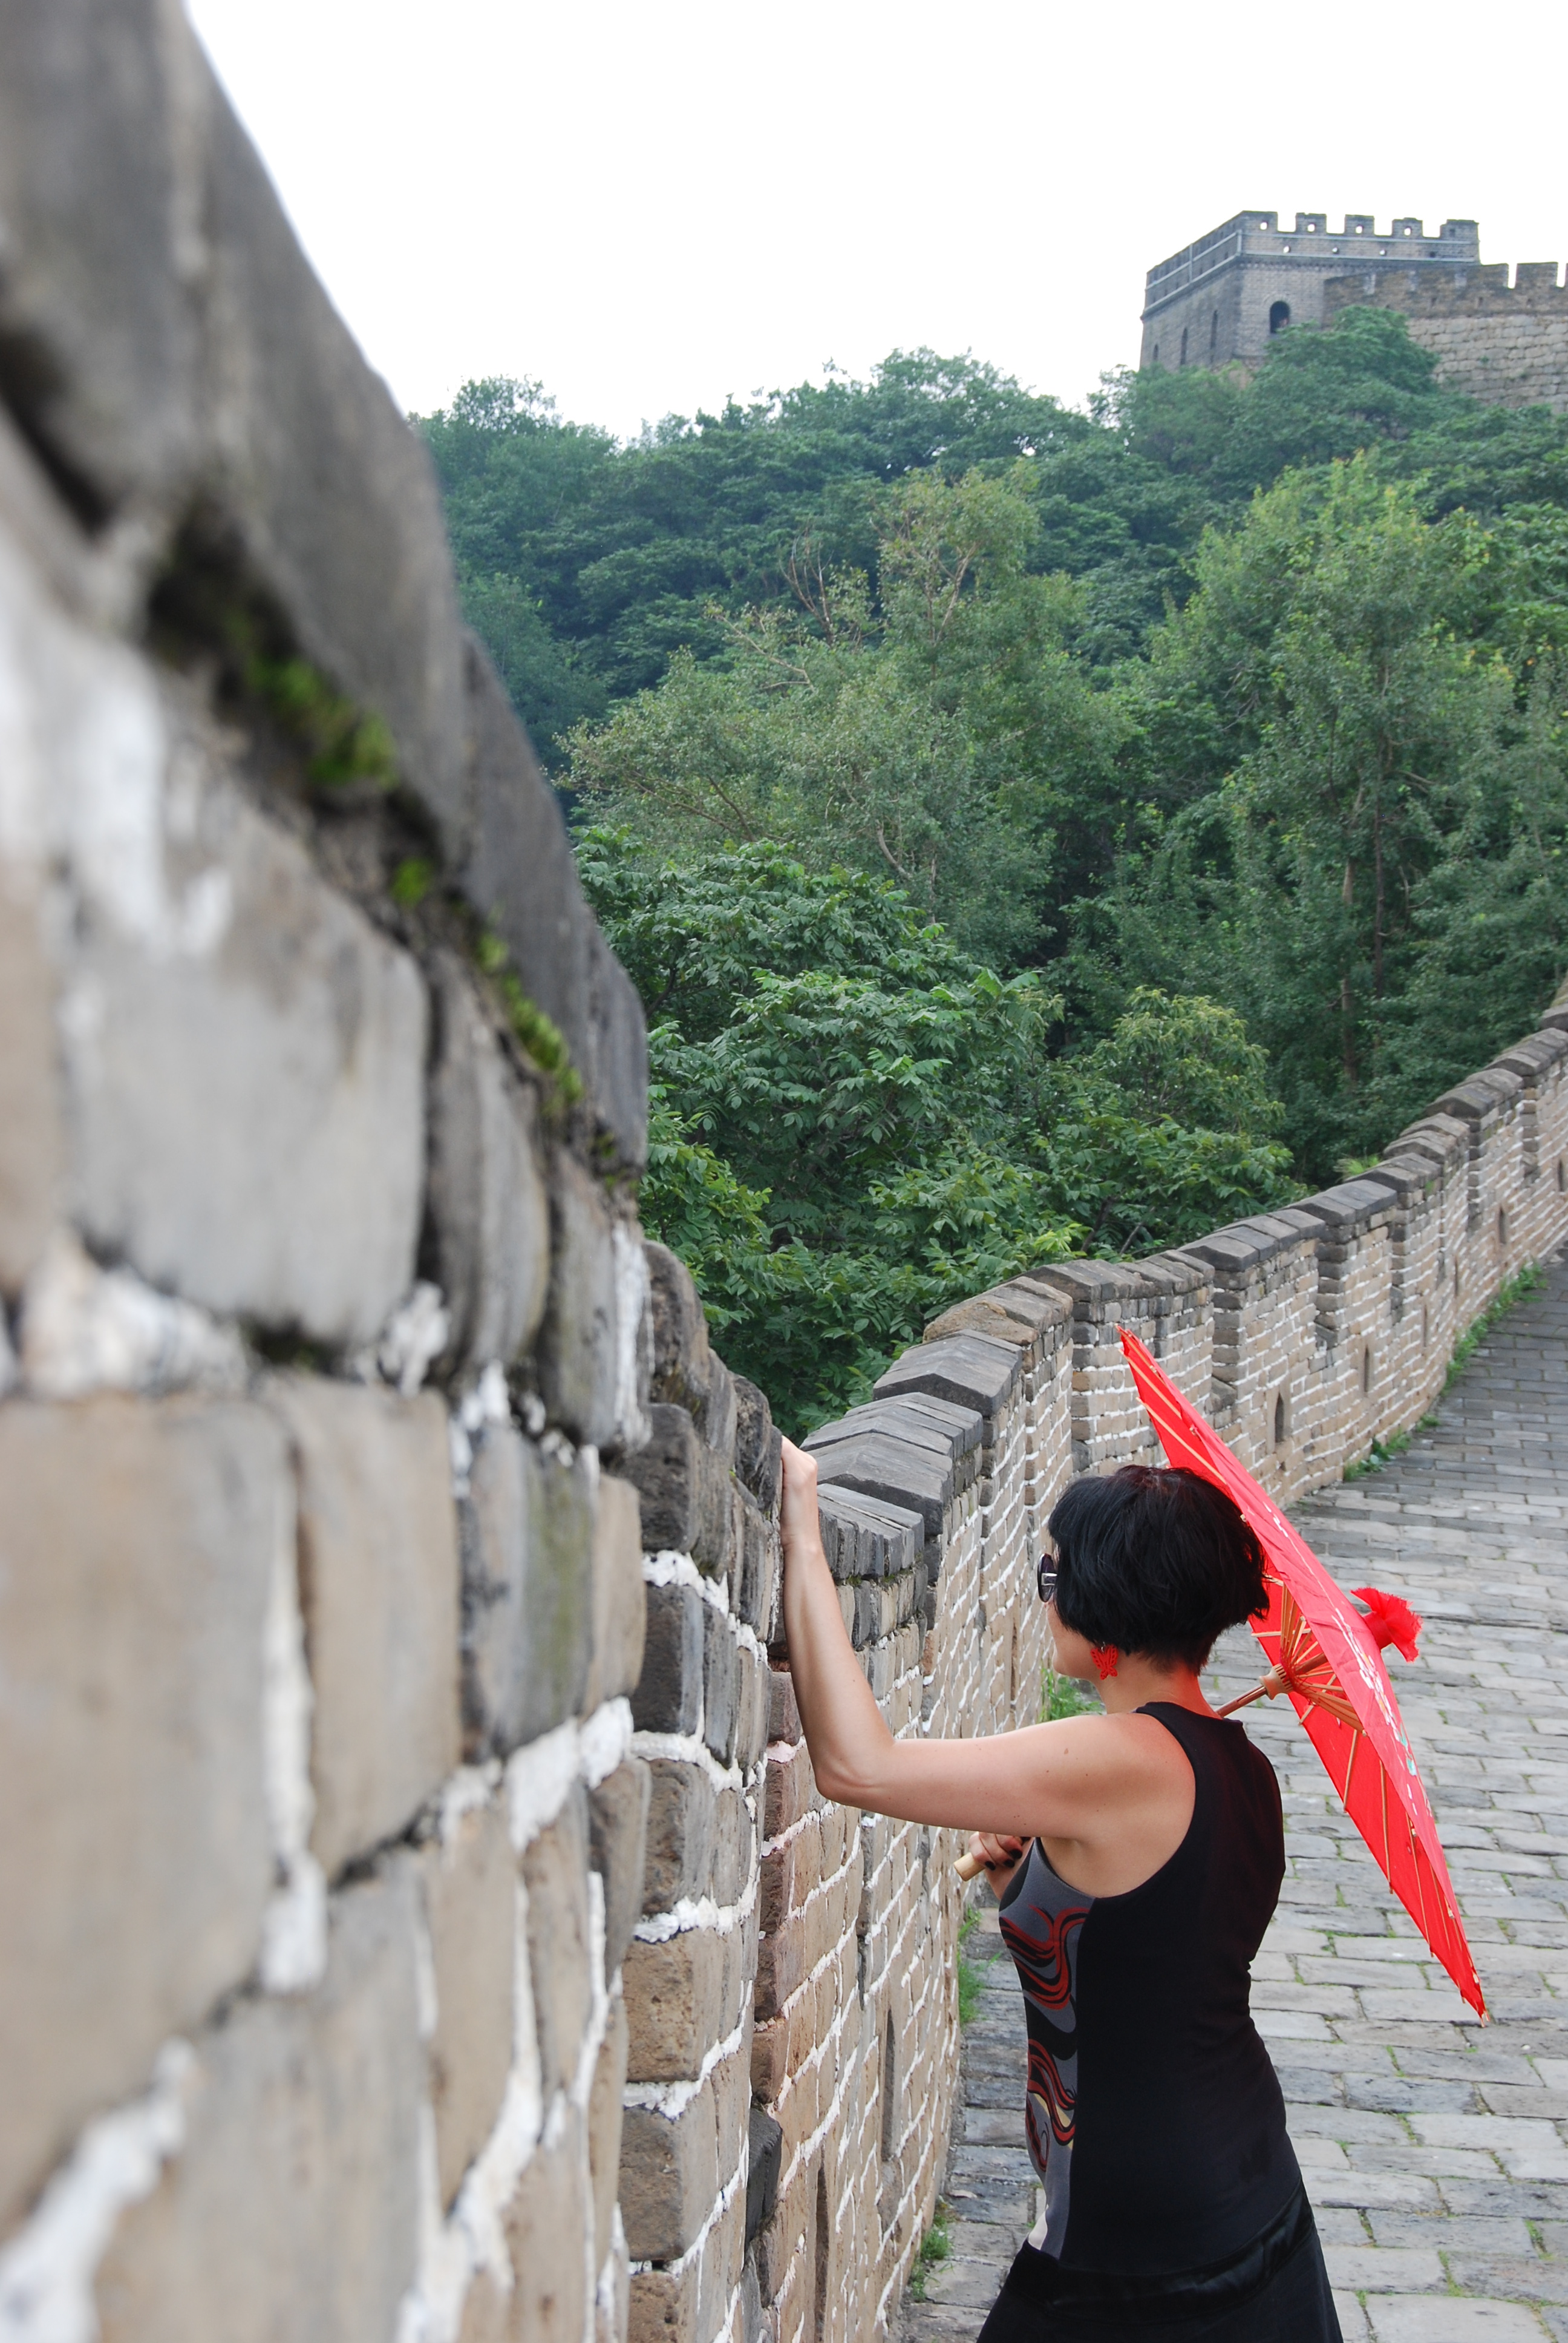 On The Great Wall of China